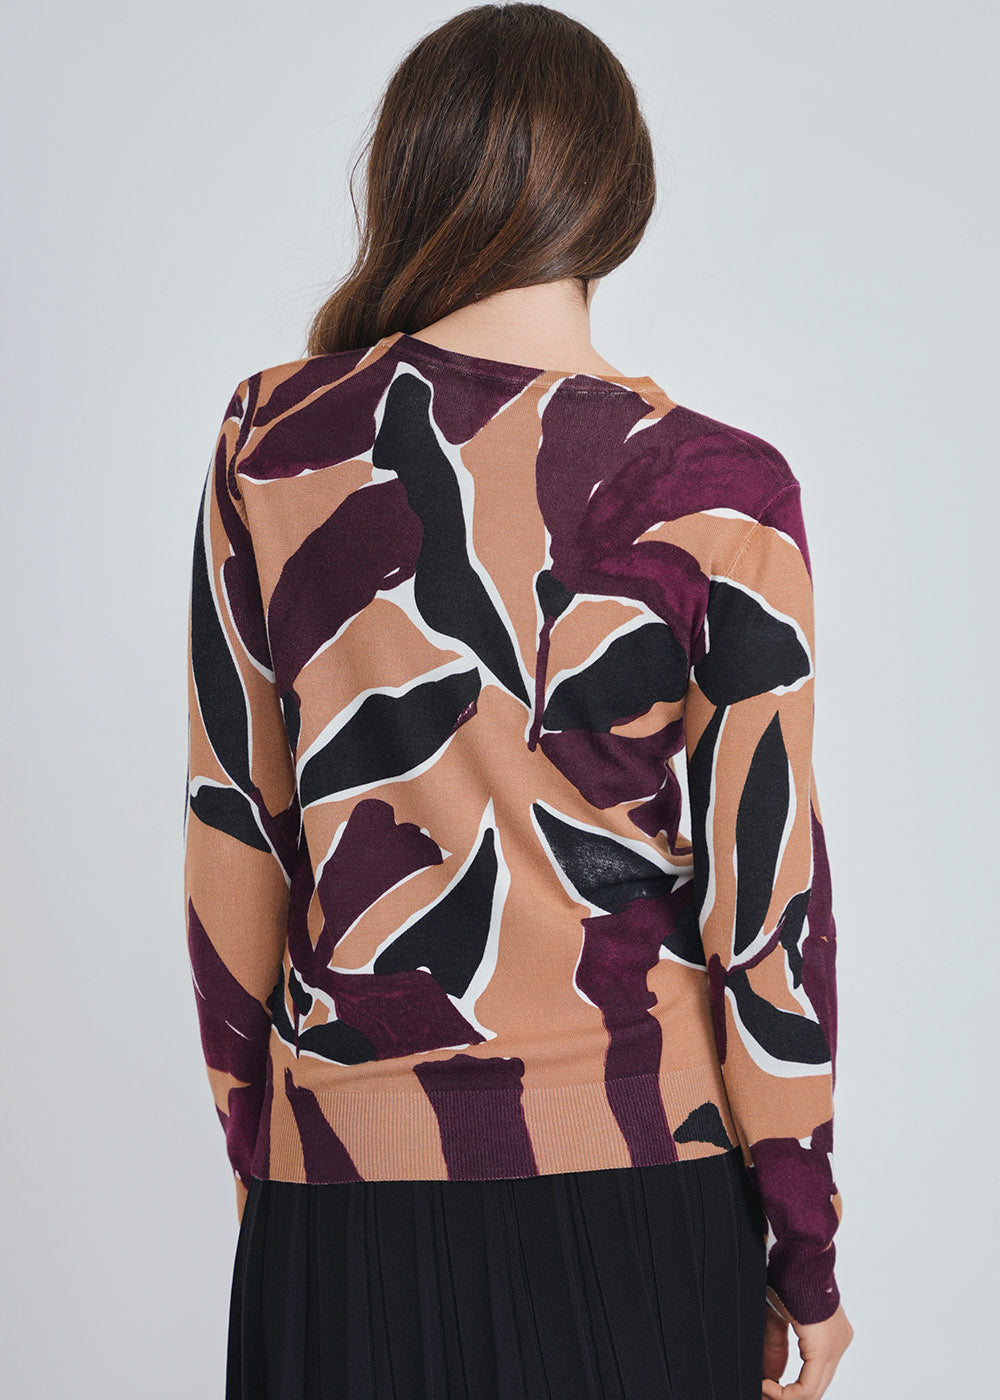 Abstract Burgundy Camel Knit Top